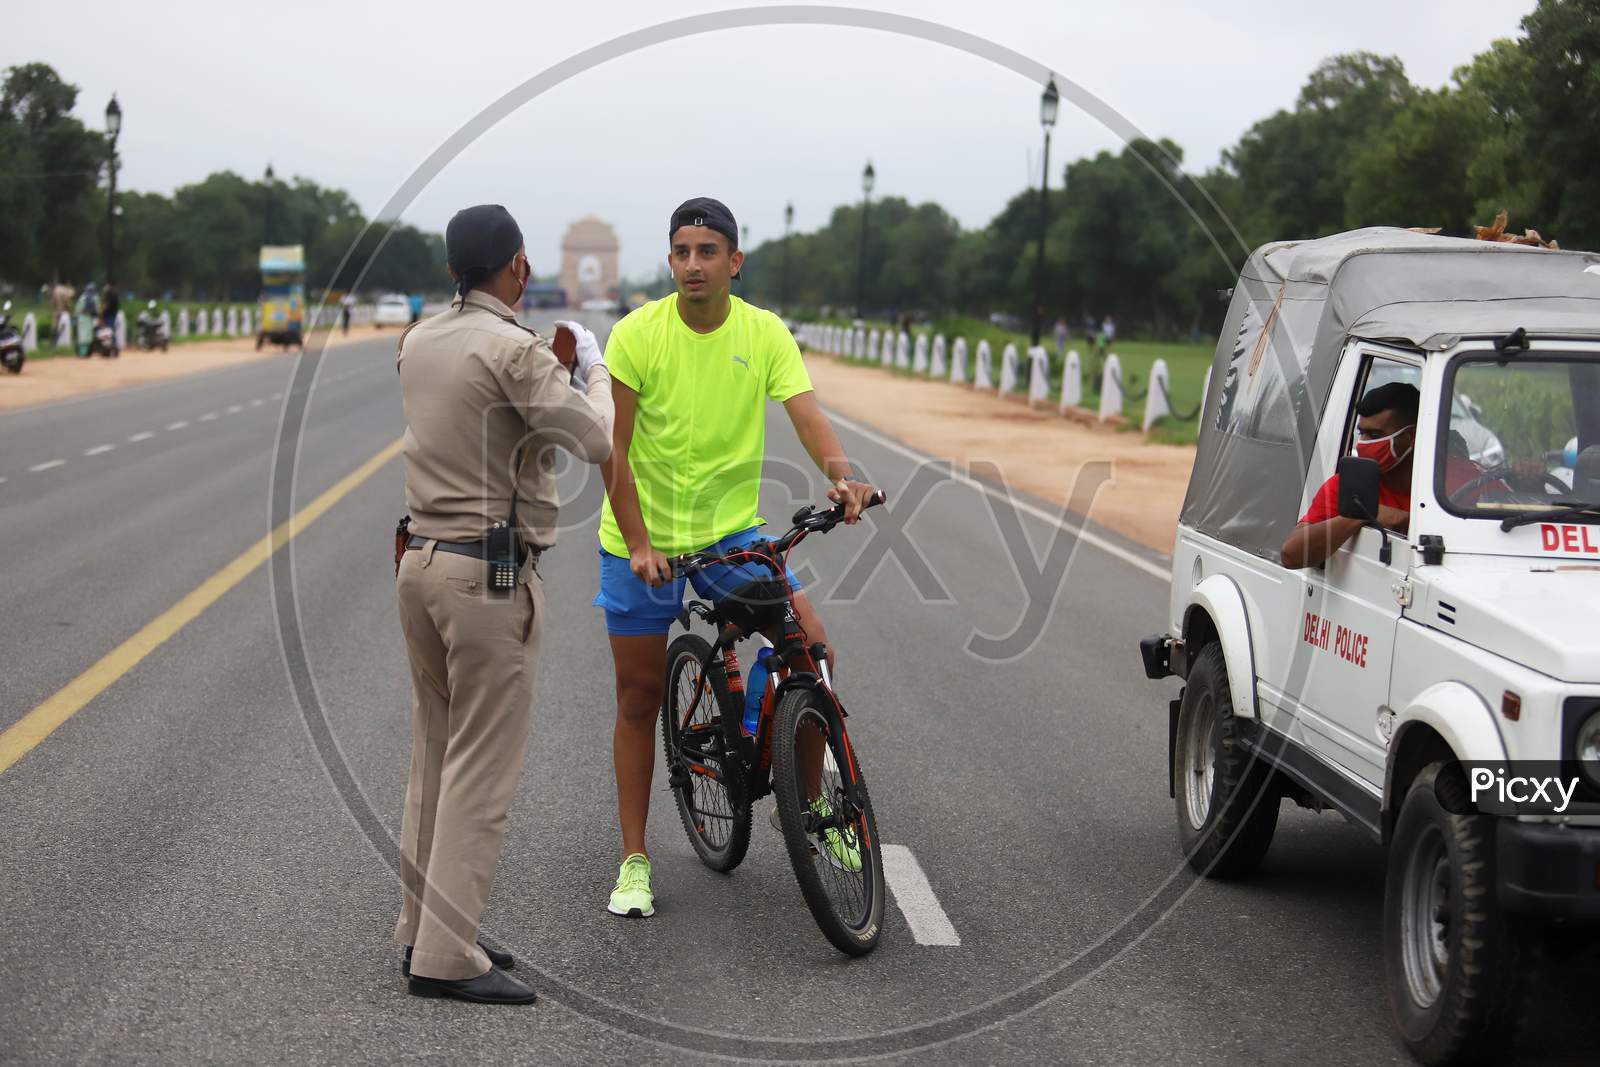 Delhi Police Official questions a cyclist for not wearing a mask near India Gate in New Delhi, India on July 07, 2020